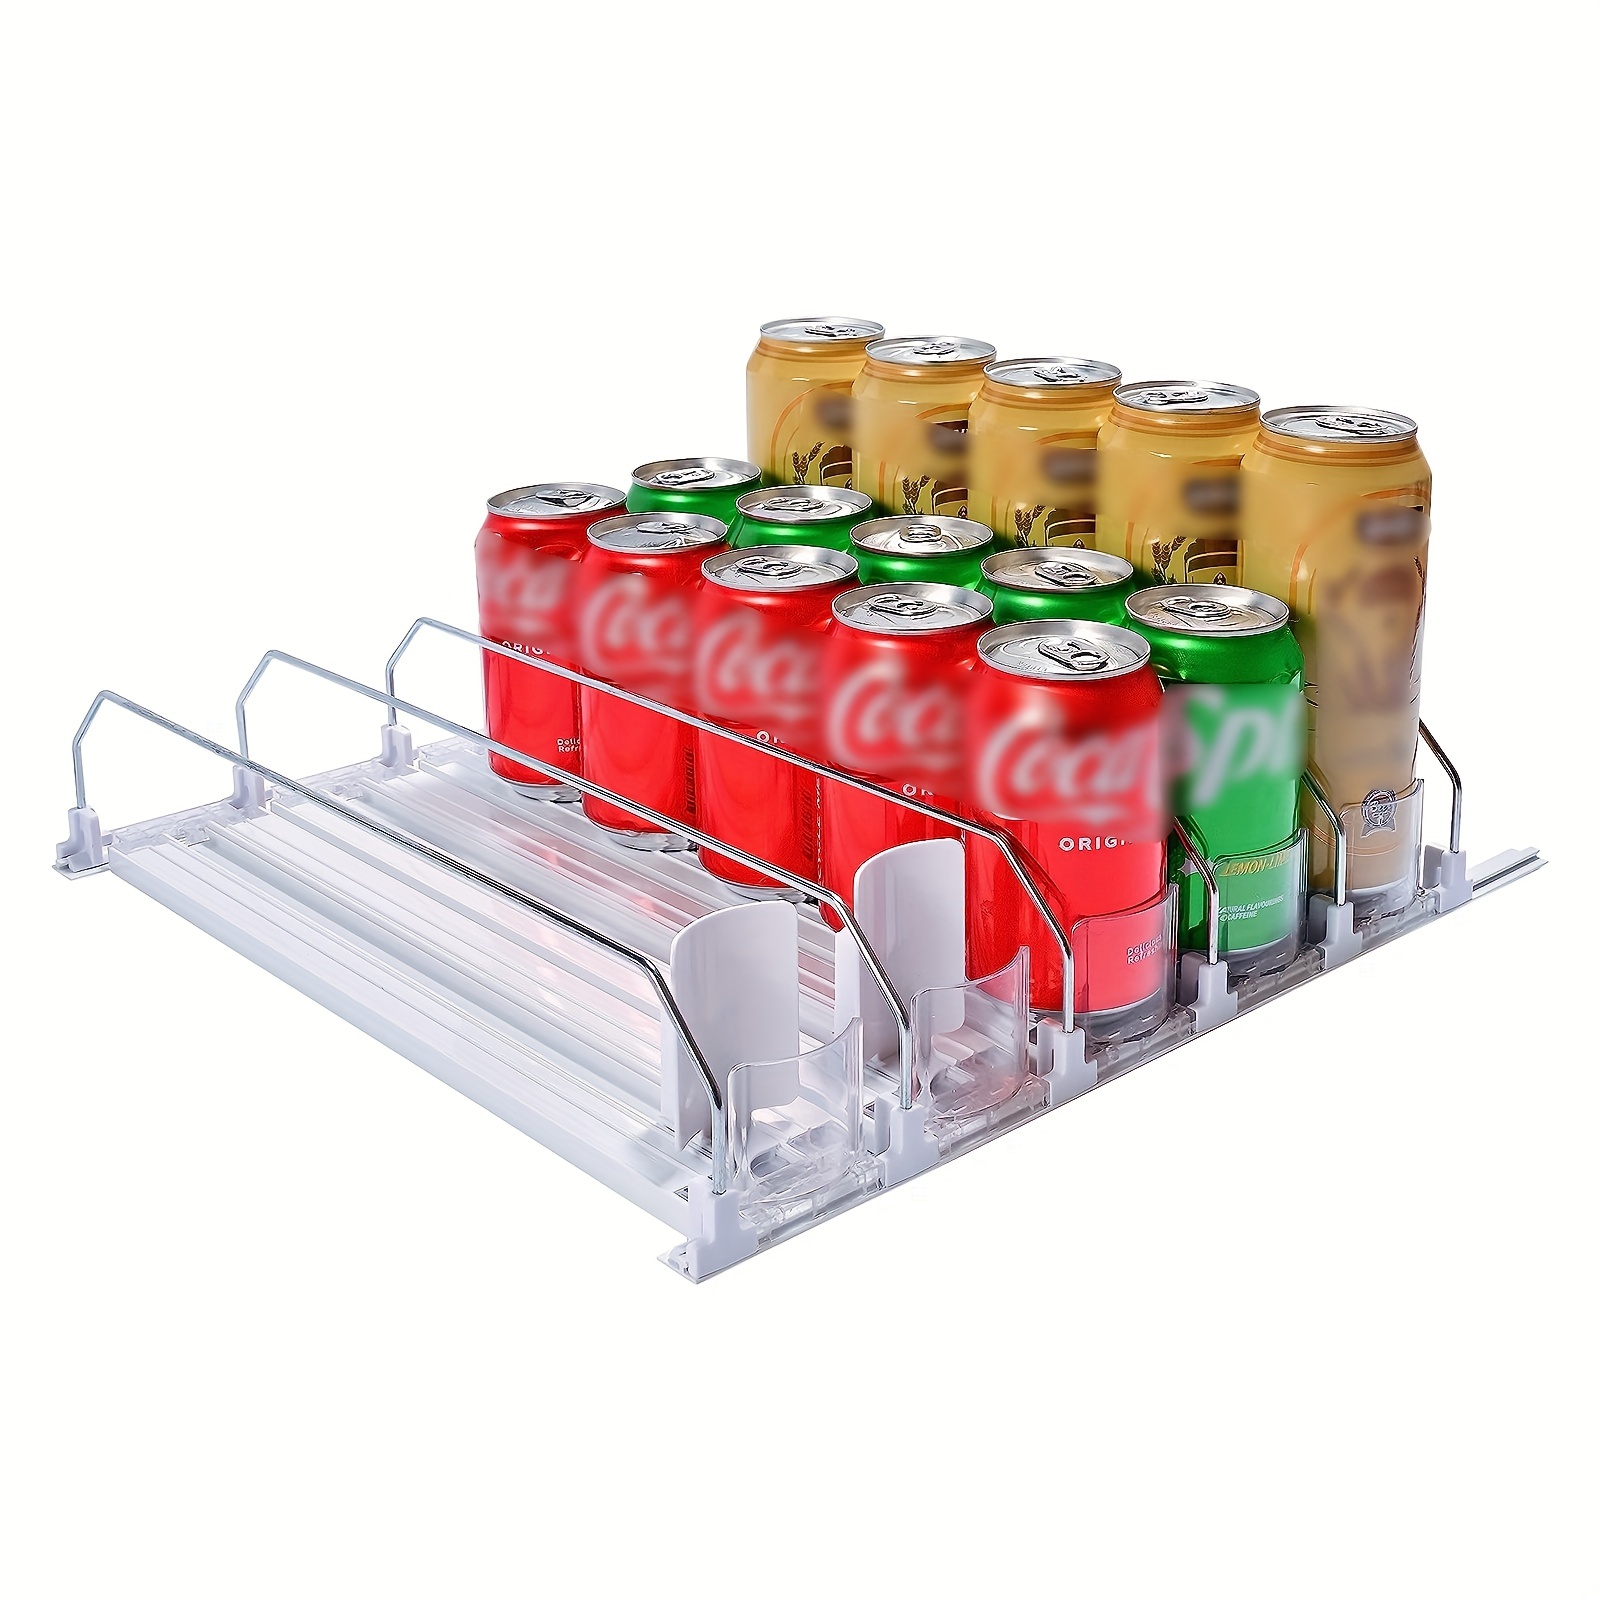 Drink Organizer for Fridge, Soda Can Dispenser for Refrigerator, Automatic  Self-Pushing Fridge Drink Dispenser Holds up to 15 Cans, 3 Row